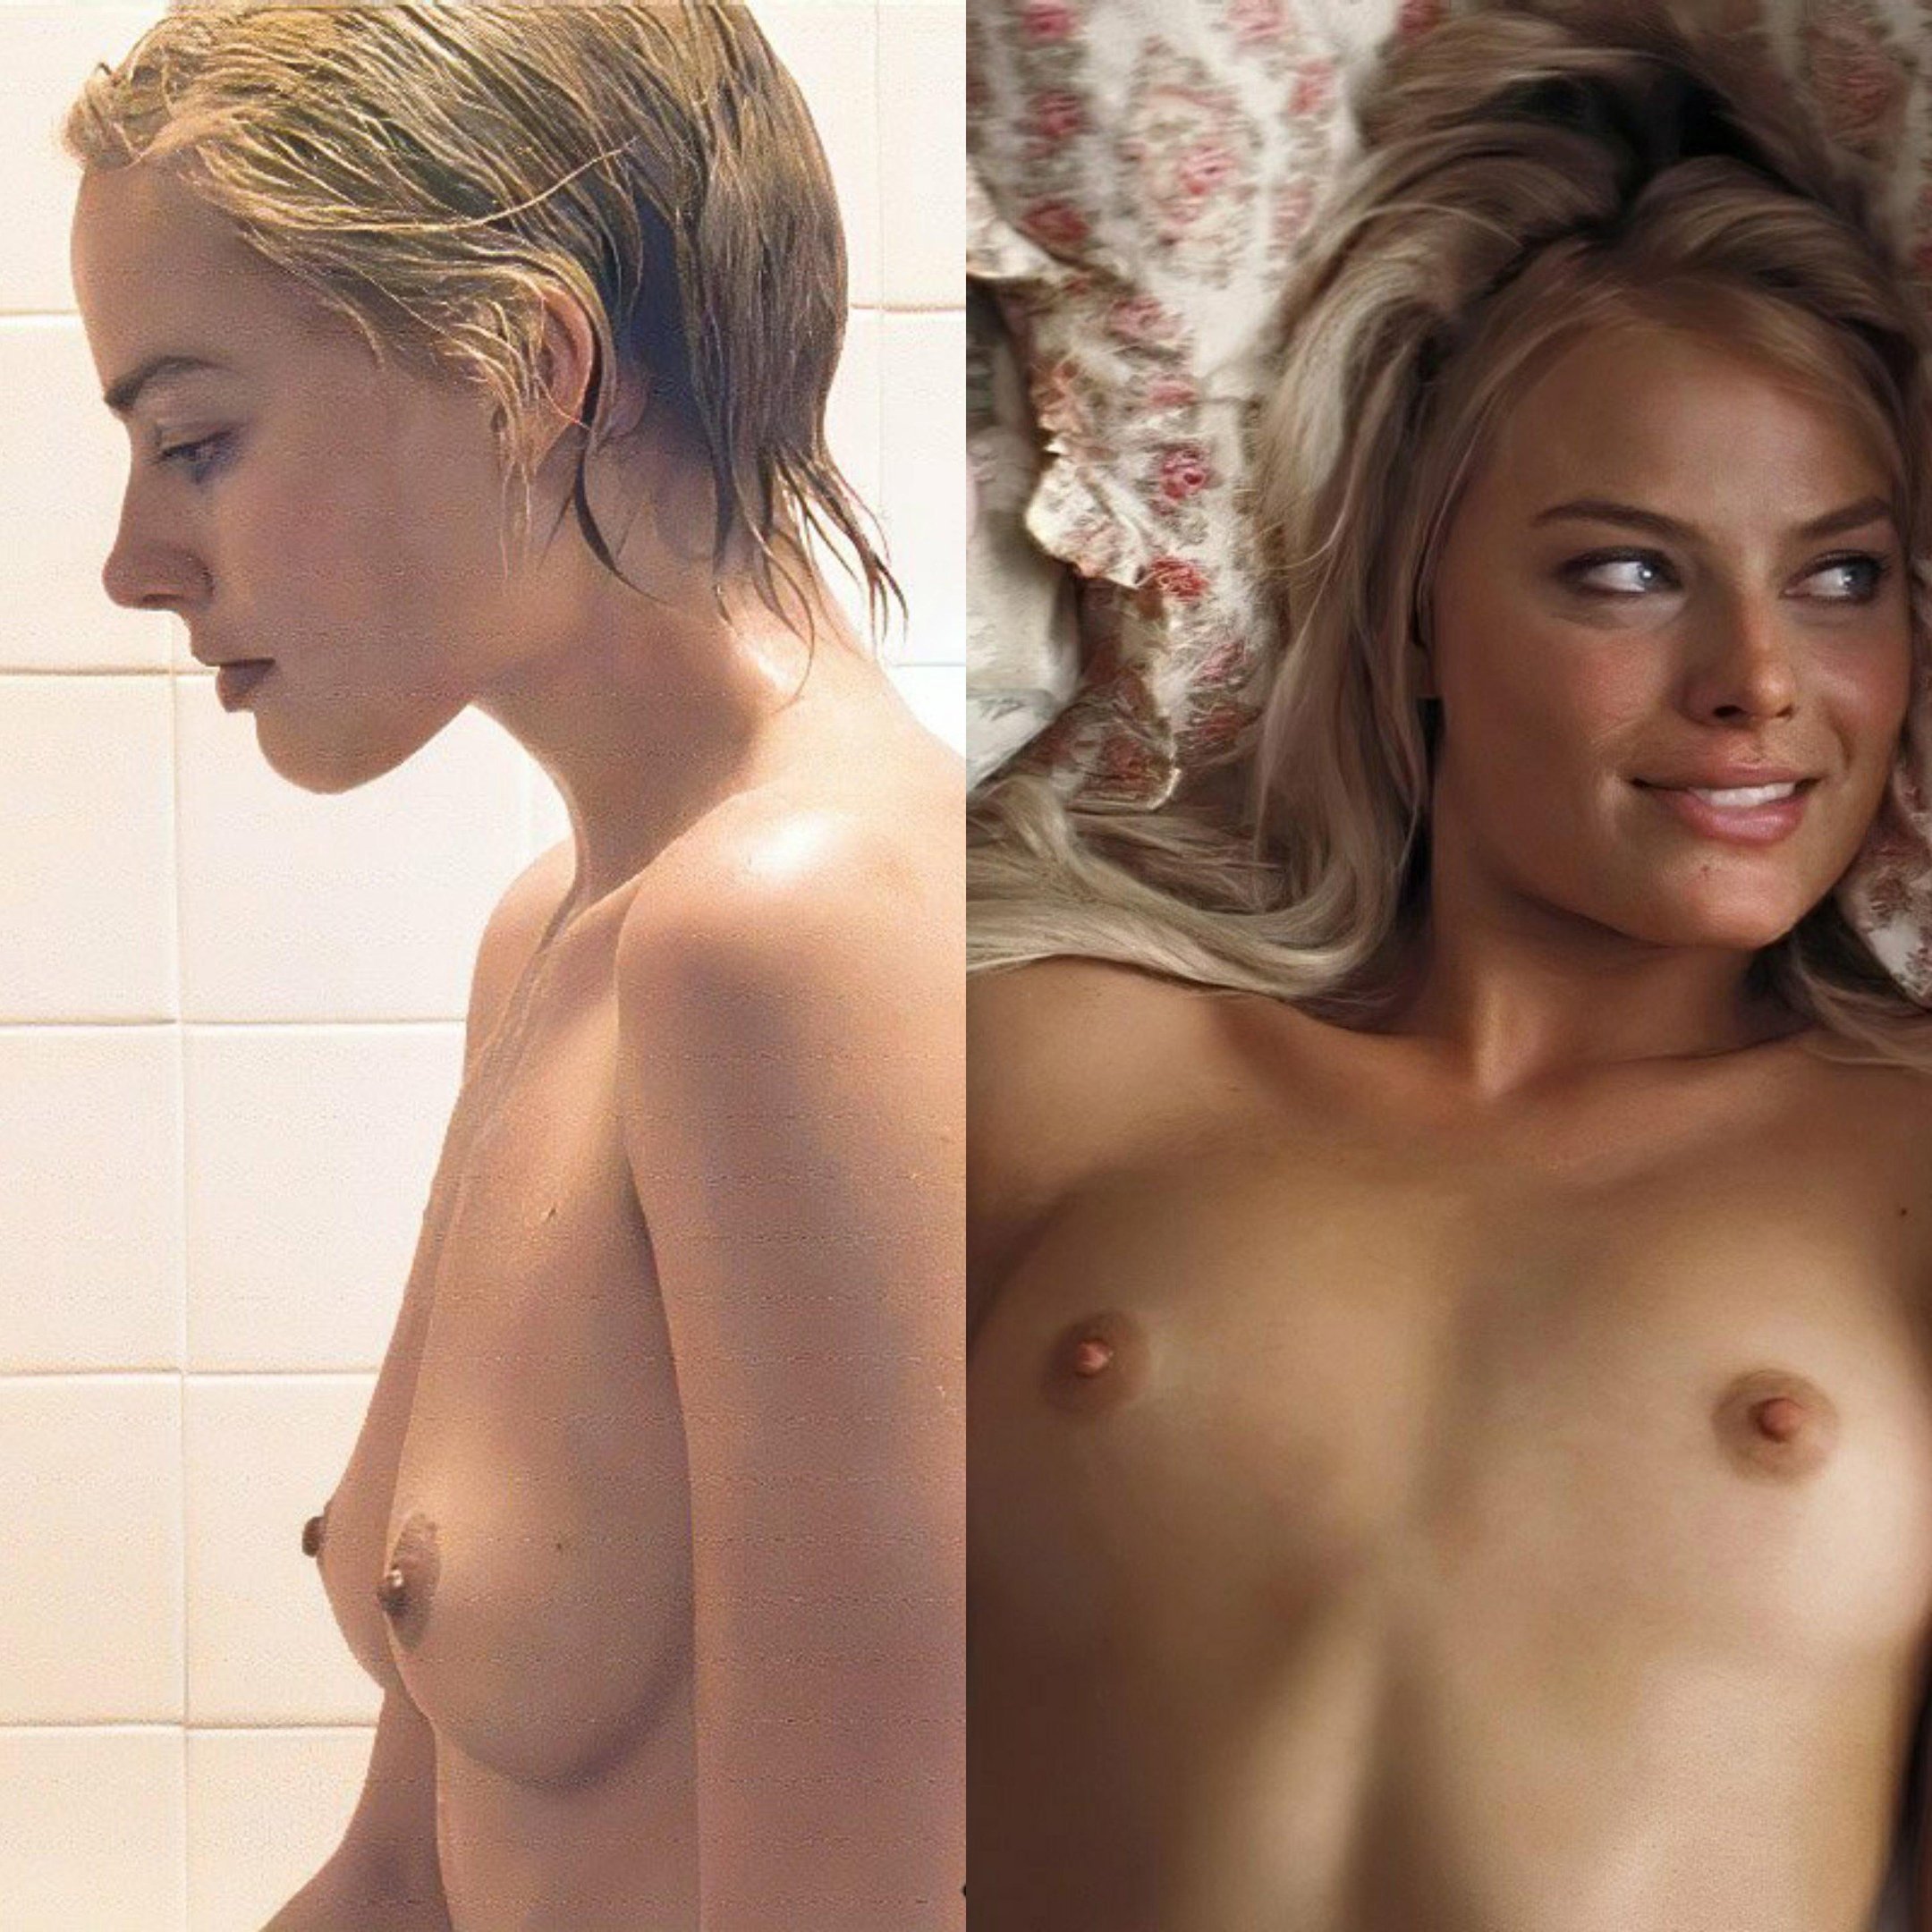 Nude pictures of margot robbie